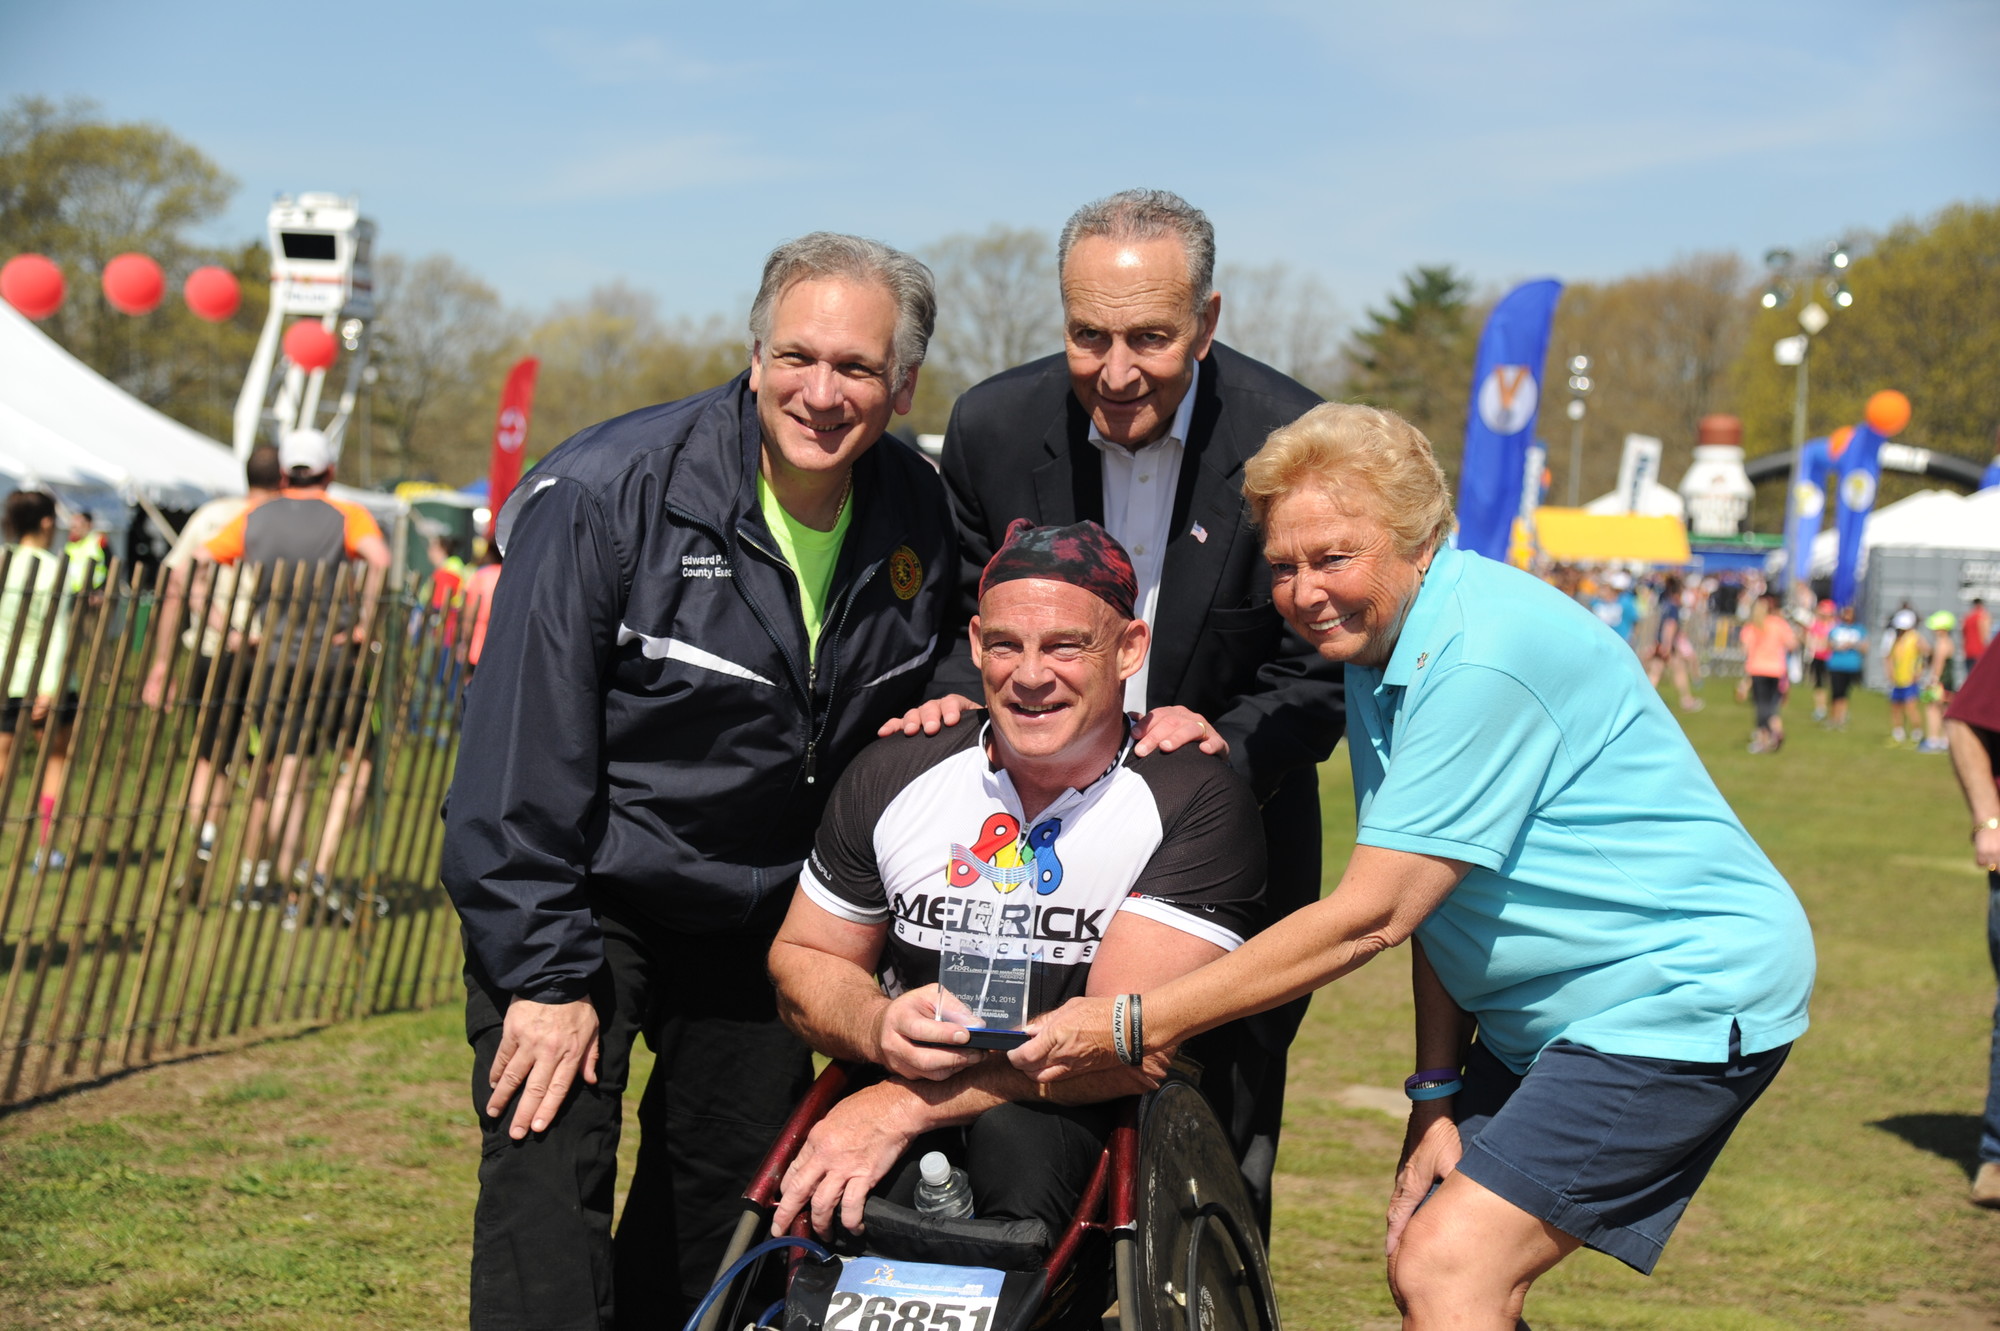 Peter Hawkins, of Malverne, crossed the finish line in two hours and ten minutes to win the wheelchair division. He was congratulated by Nassau County Executive Ed Mangano, at left, U.S. Sen. Charles Schumer and Nassau County Legislator Rose Walker.